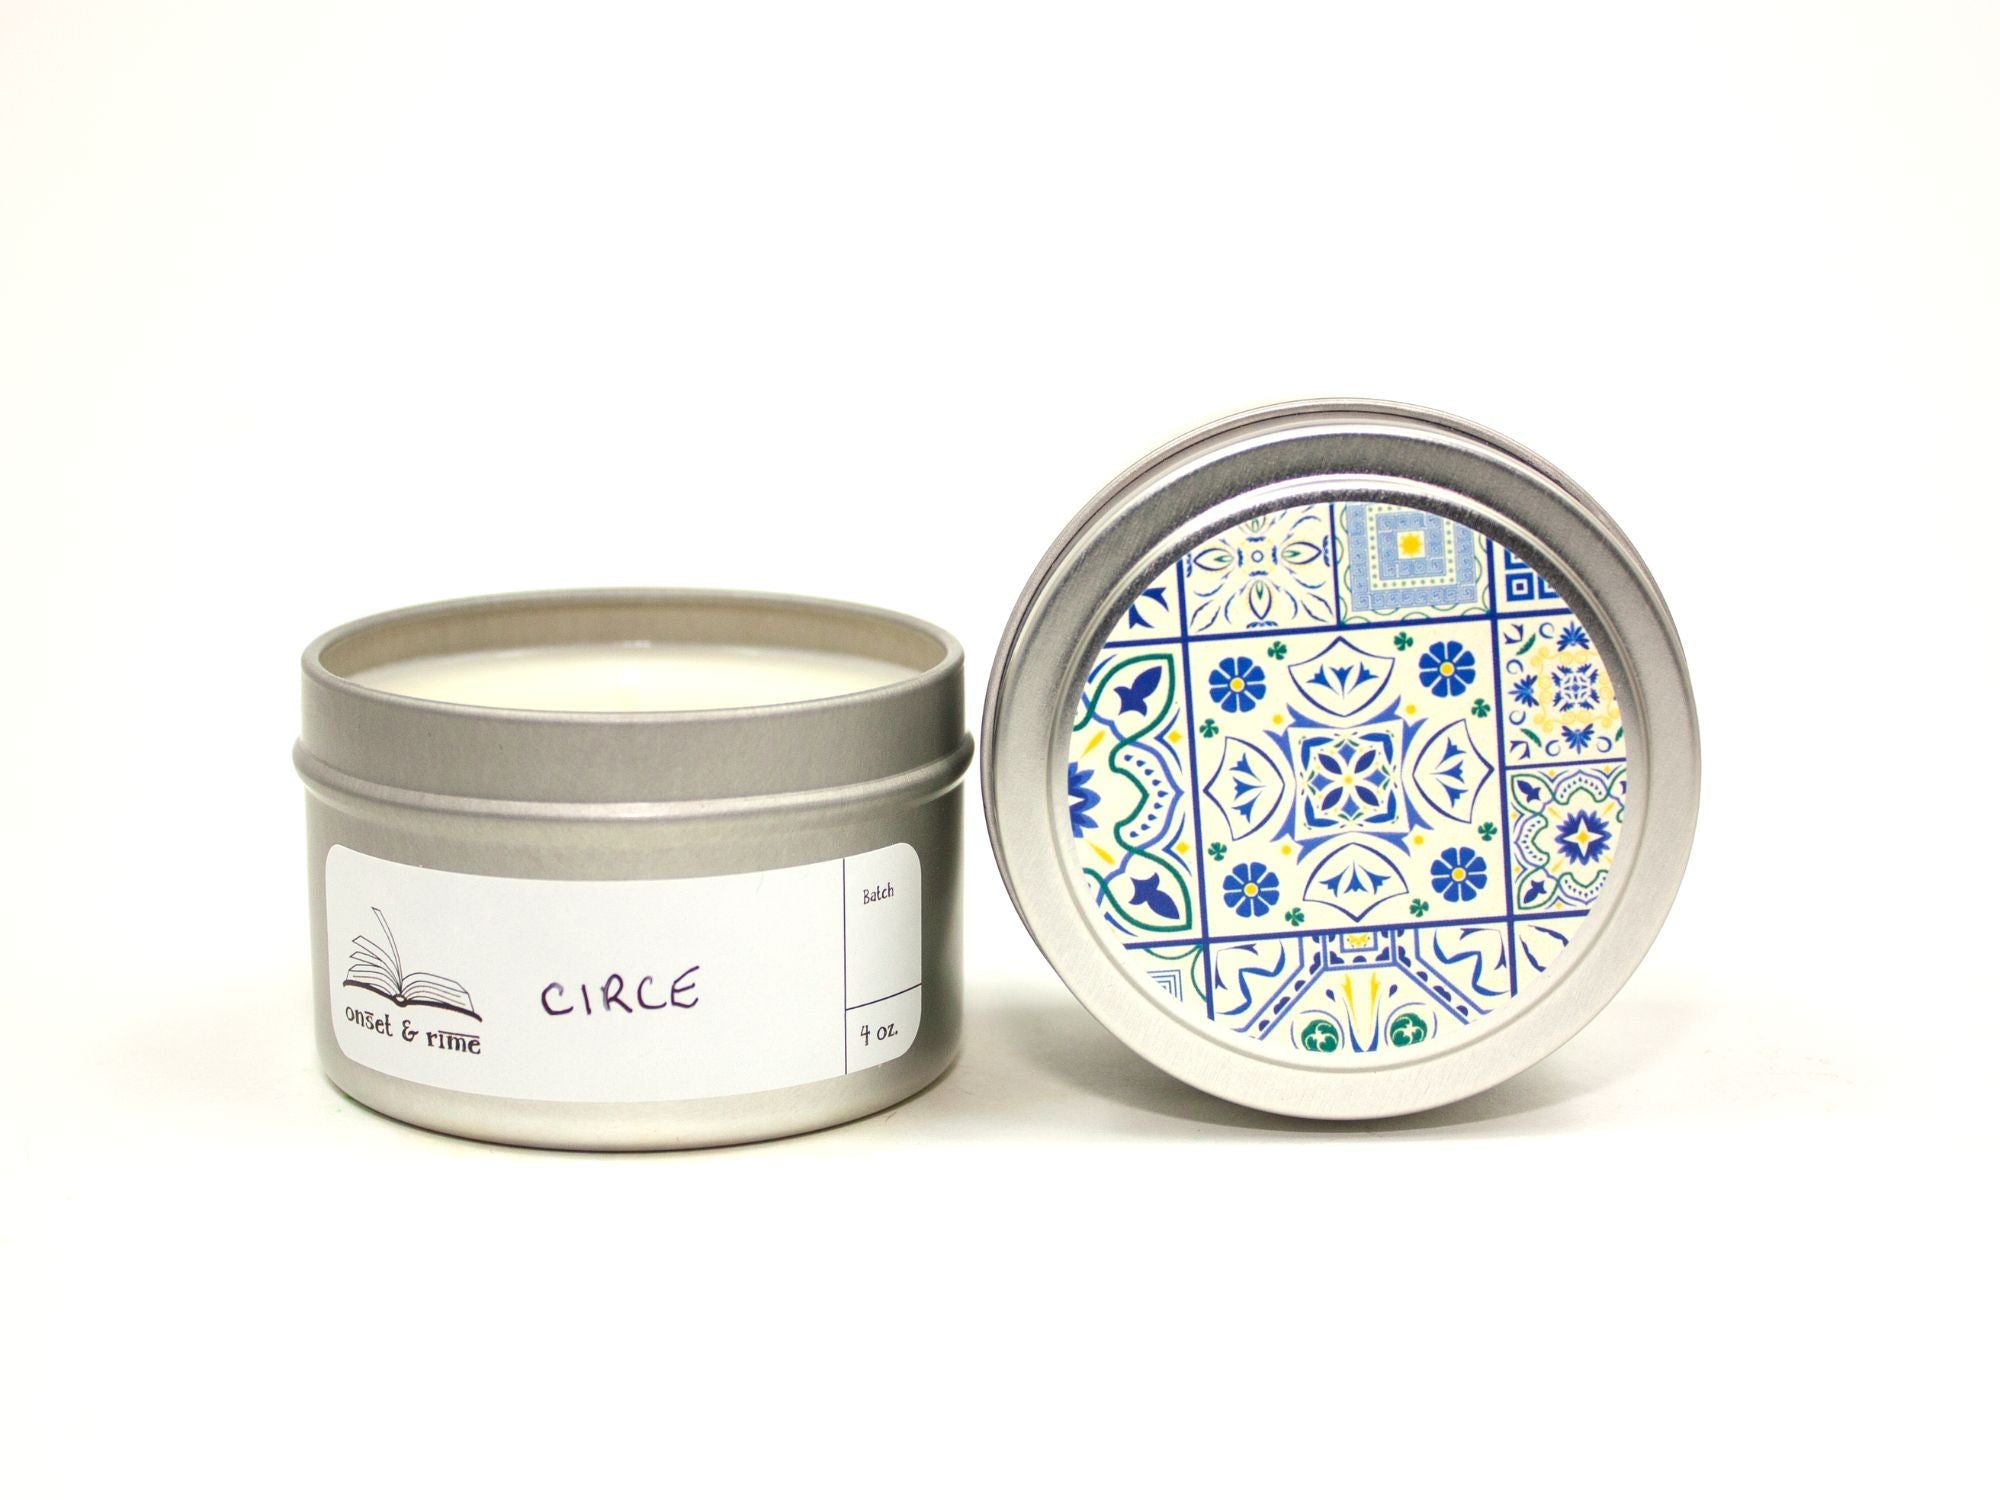 Onset & Rime lemon, cypress scented candle called 